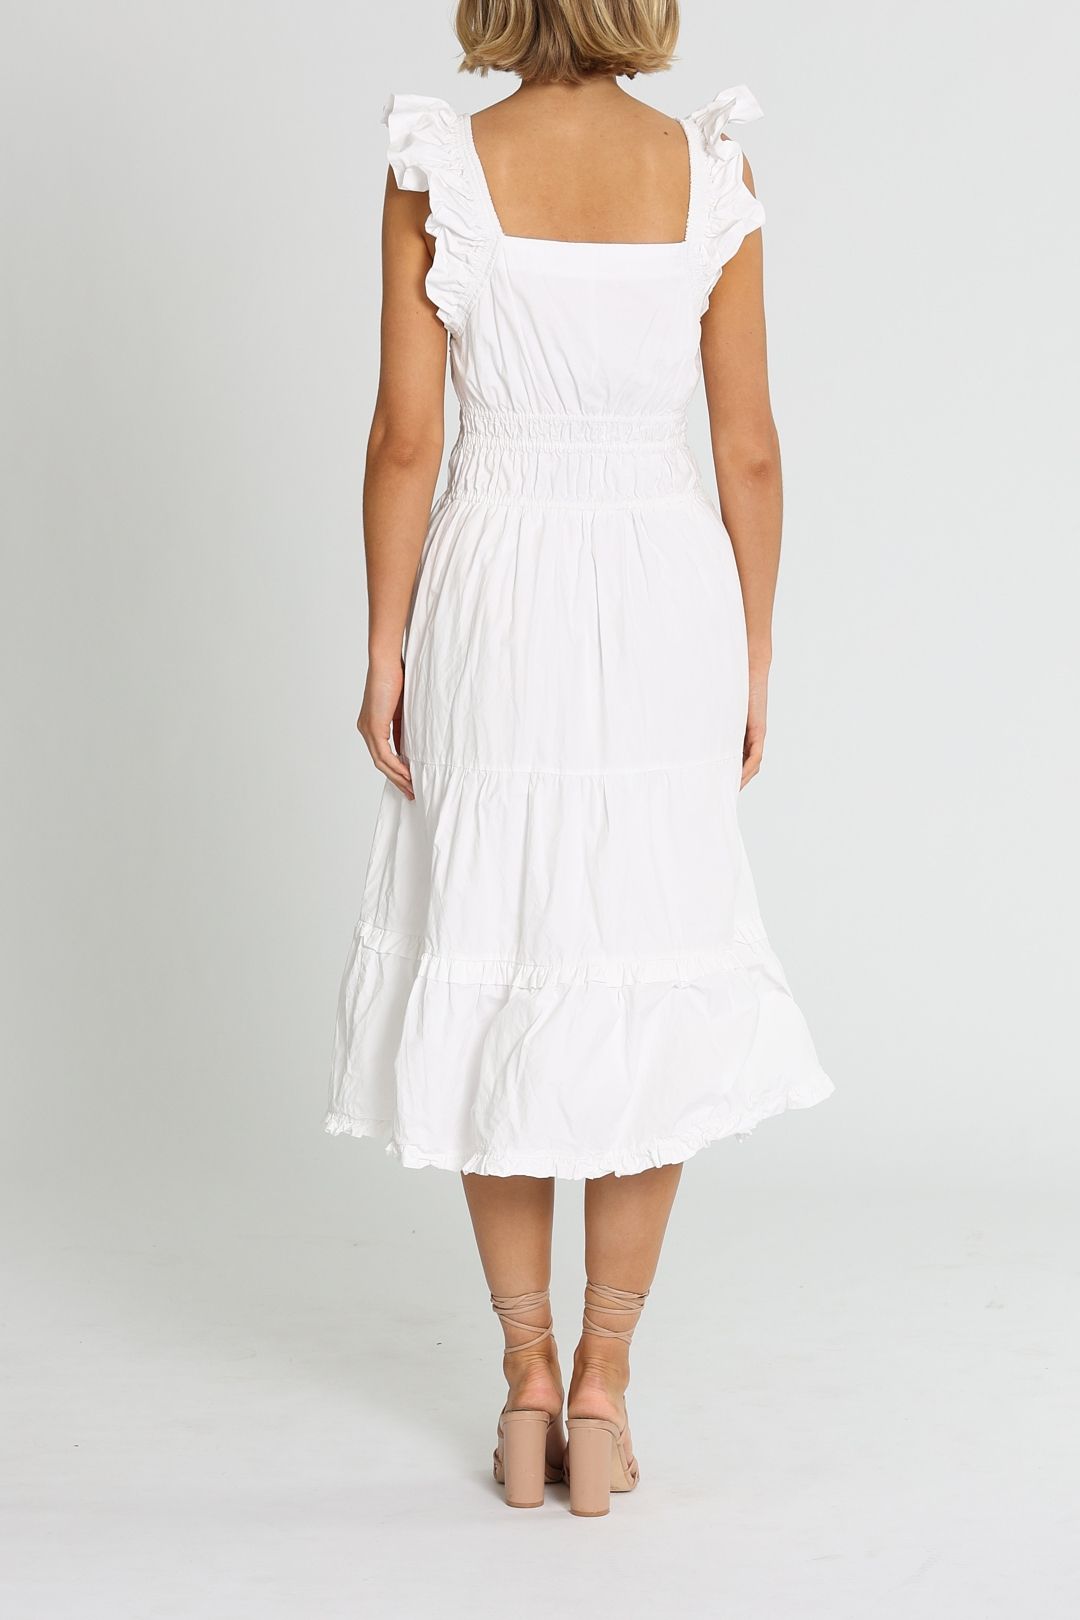 Magali Pascal Jeanette Dress Tiered Skirt